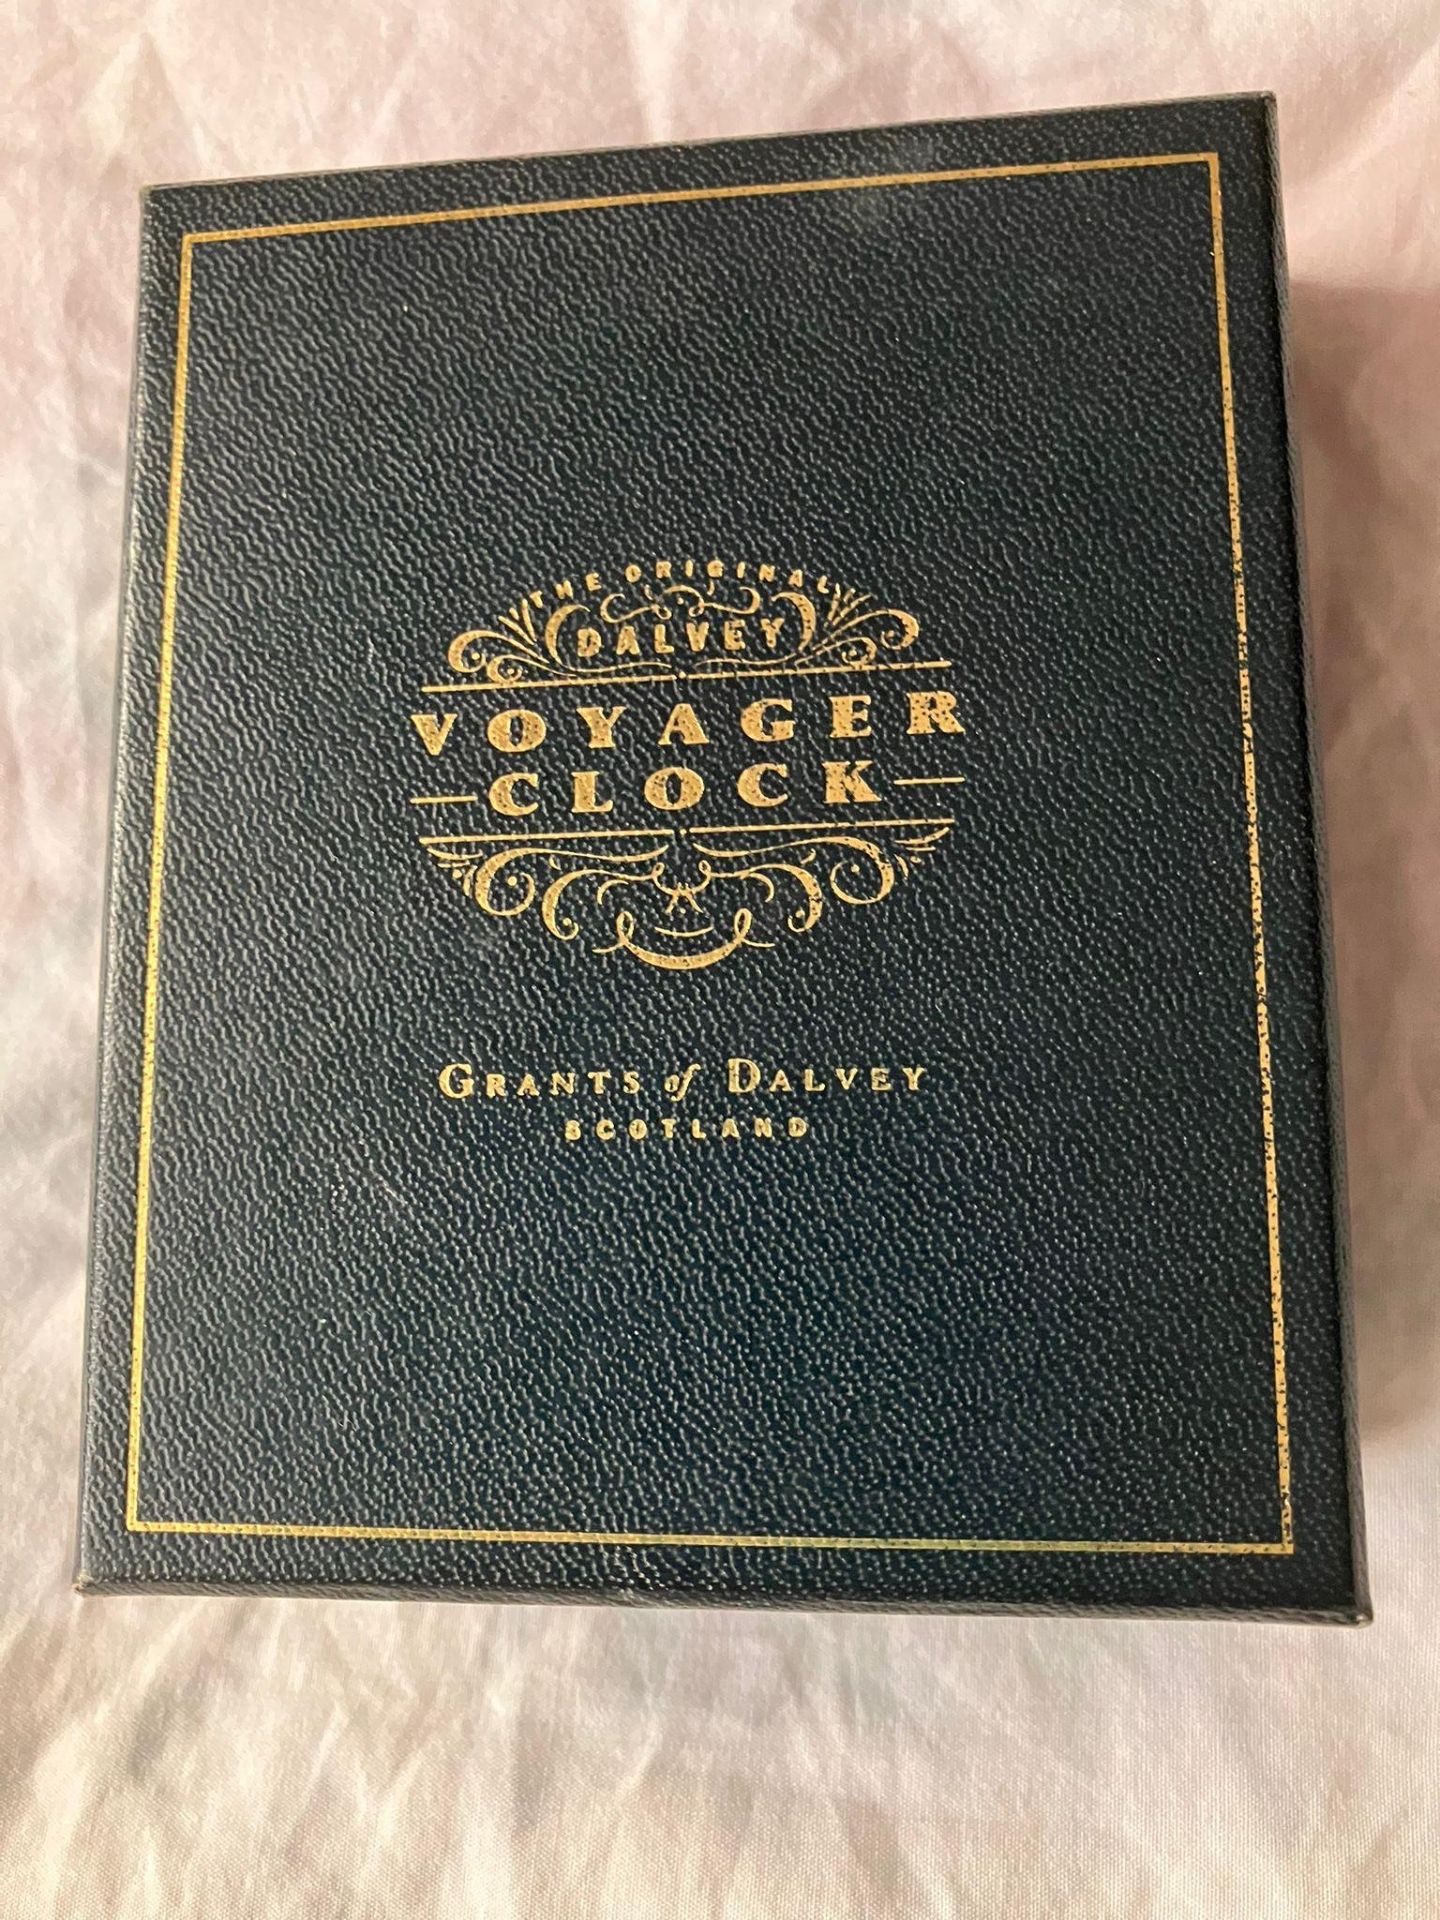 Vintage Grants of Dalvey VOYAGER CLOCK. Complete with original box and instruction Booklet. Quartz - Image 4 of 7